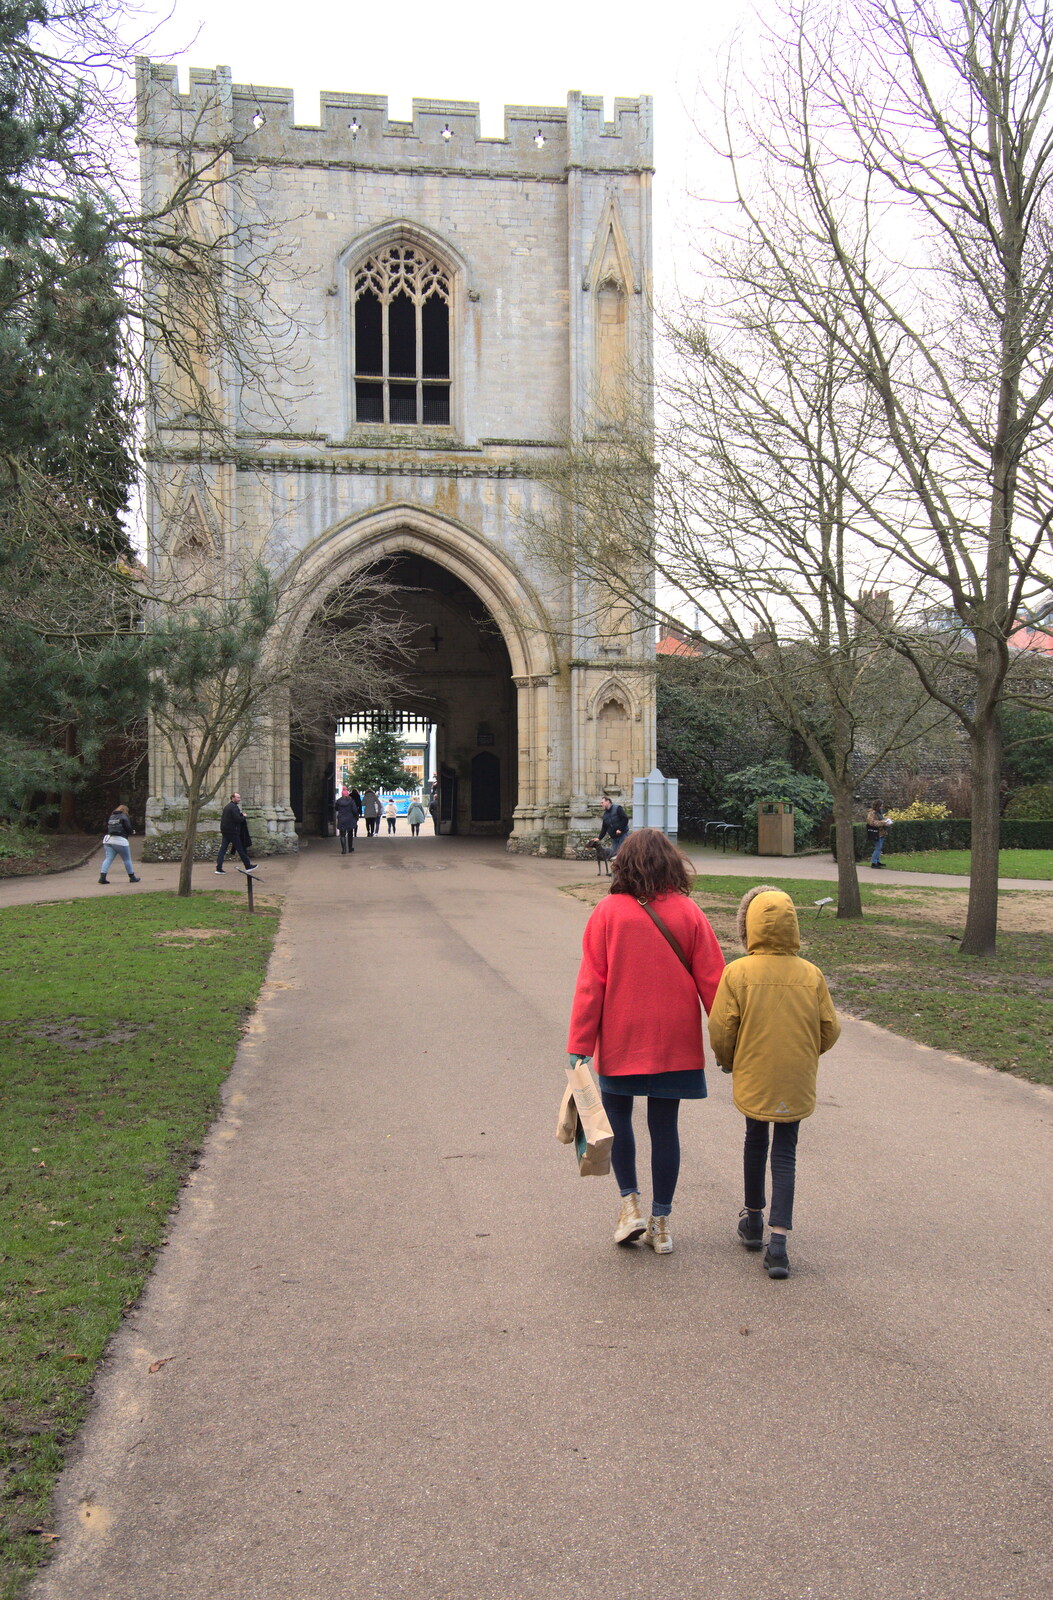 We head off back through Abbeygate from A Few Hours in Bury St. Edmunds, Suffolk - 3rd January 2022